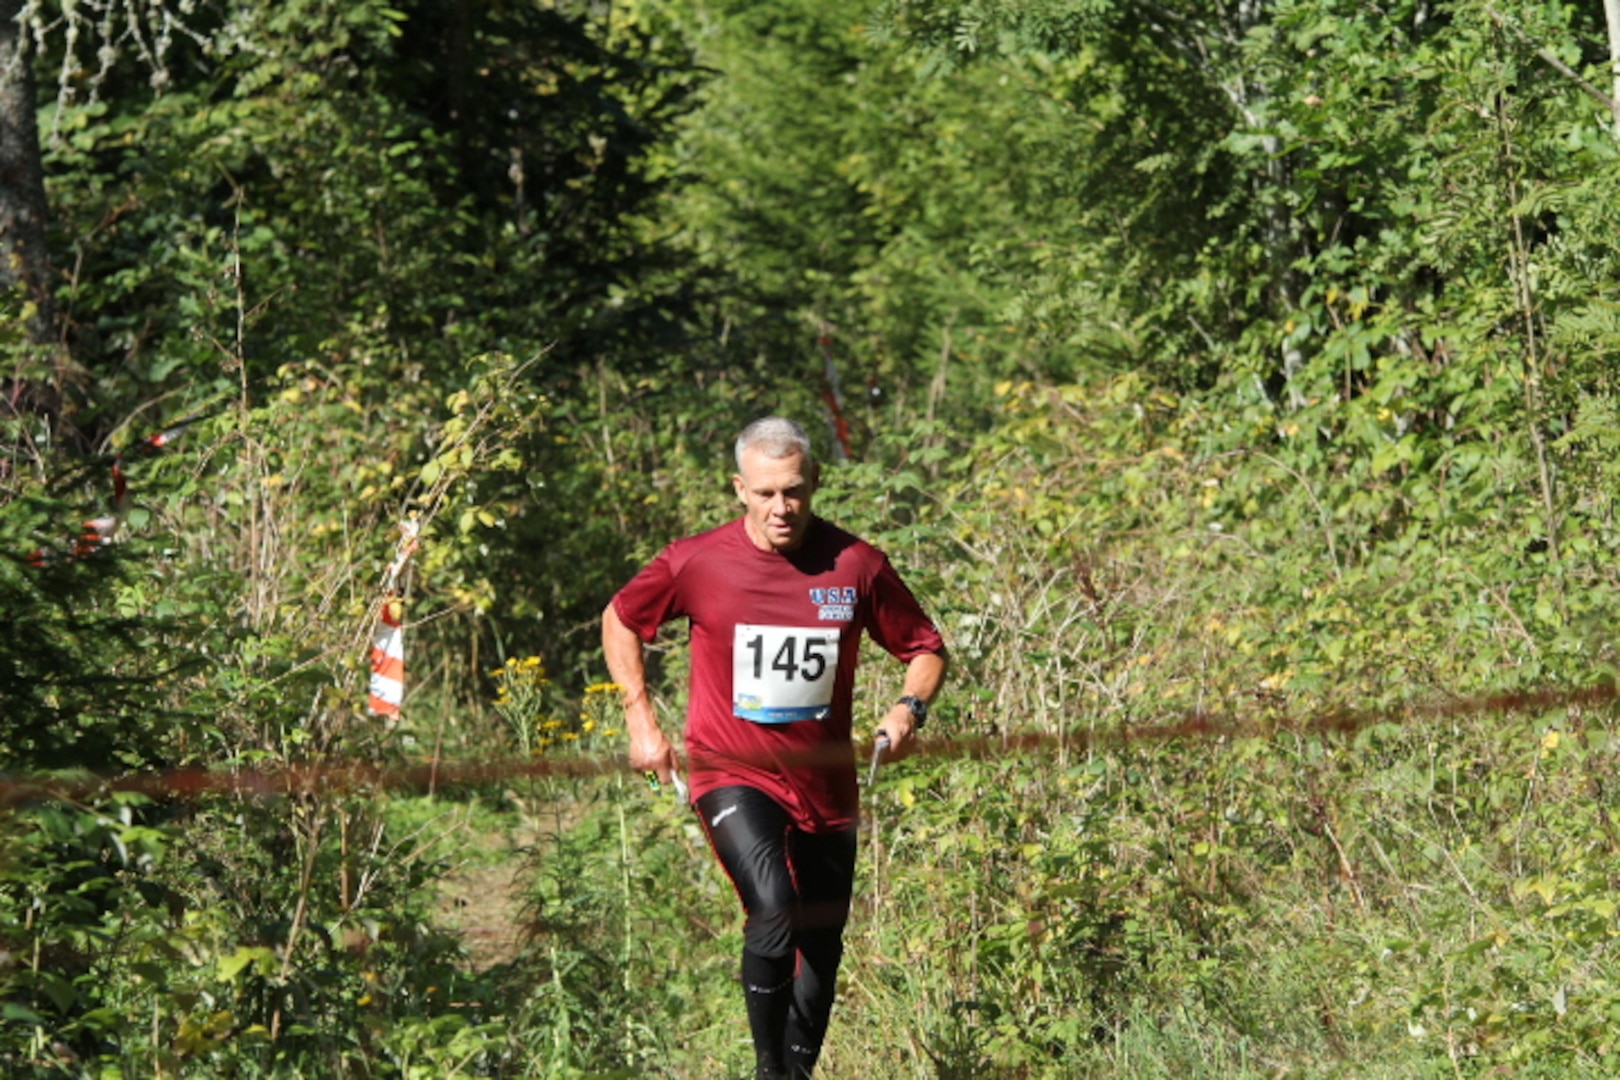 CDR Grant Staats (Navy) at the 2013 CISM World Orienteering Military Championship hosted by the Swedish Armed Forces in Eksjo, Sweden from 26 August to 1 September.